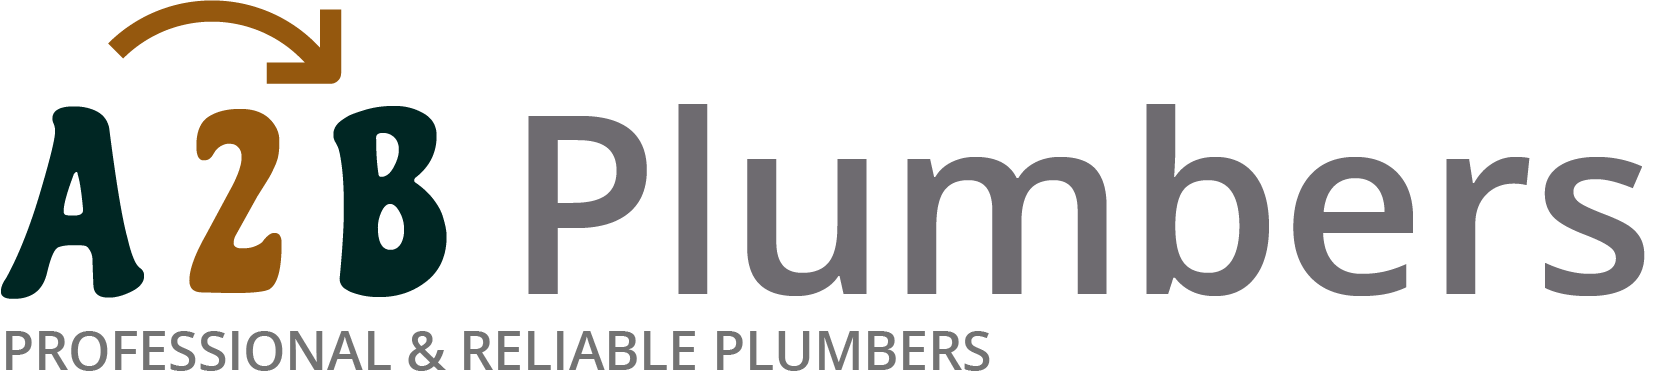 If you need a boiler installed, a radiator repaired or a leaking tap fixed, call us now - we provide services for properties in Calne and the local area.